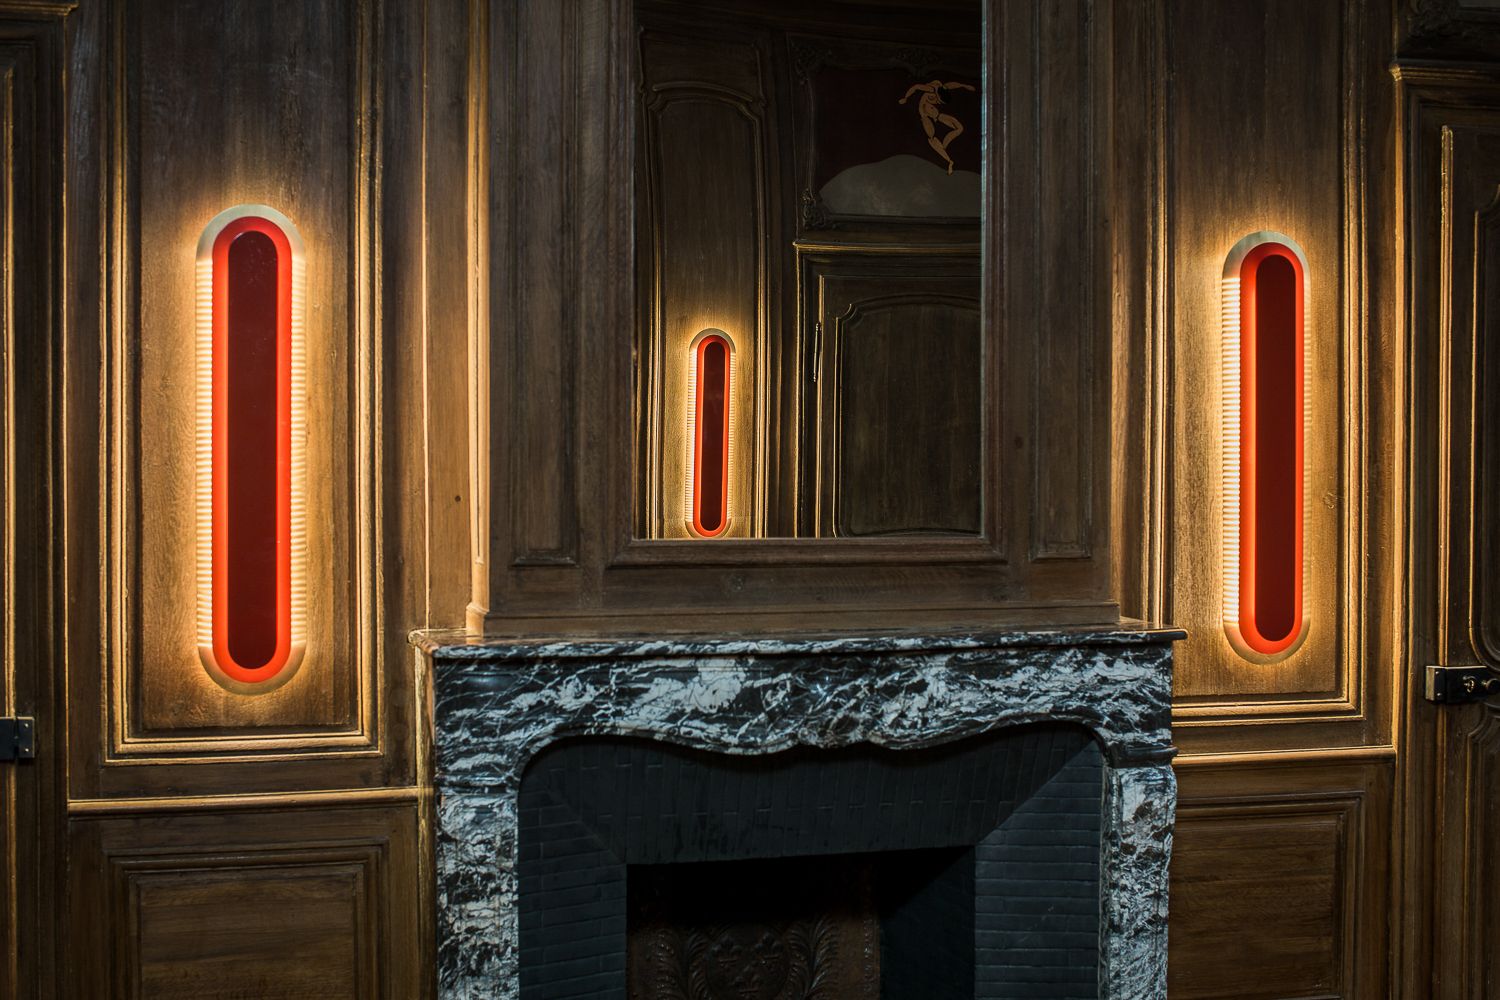 Coco Chanel Apartment Introduces Chic Lighting - Desjeux Delaye's